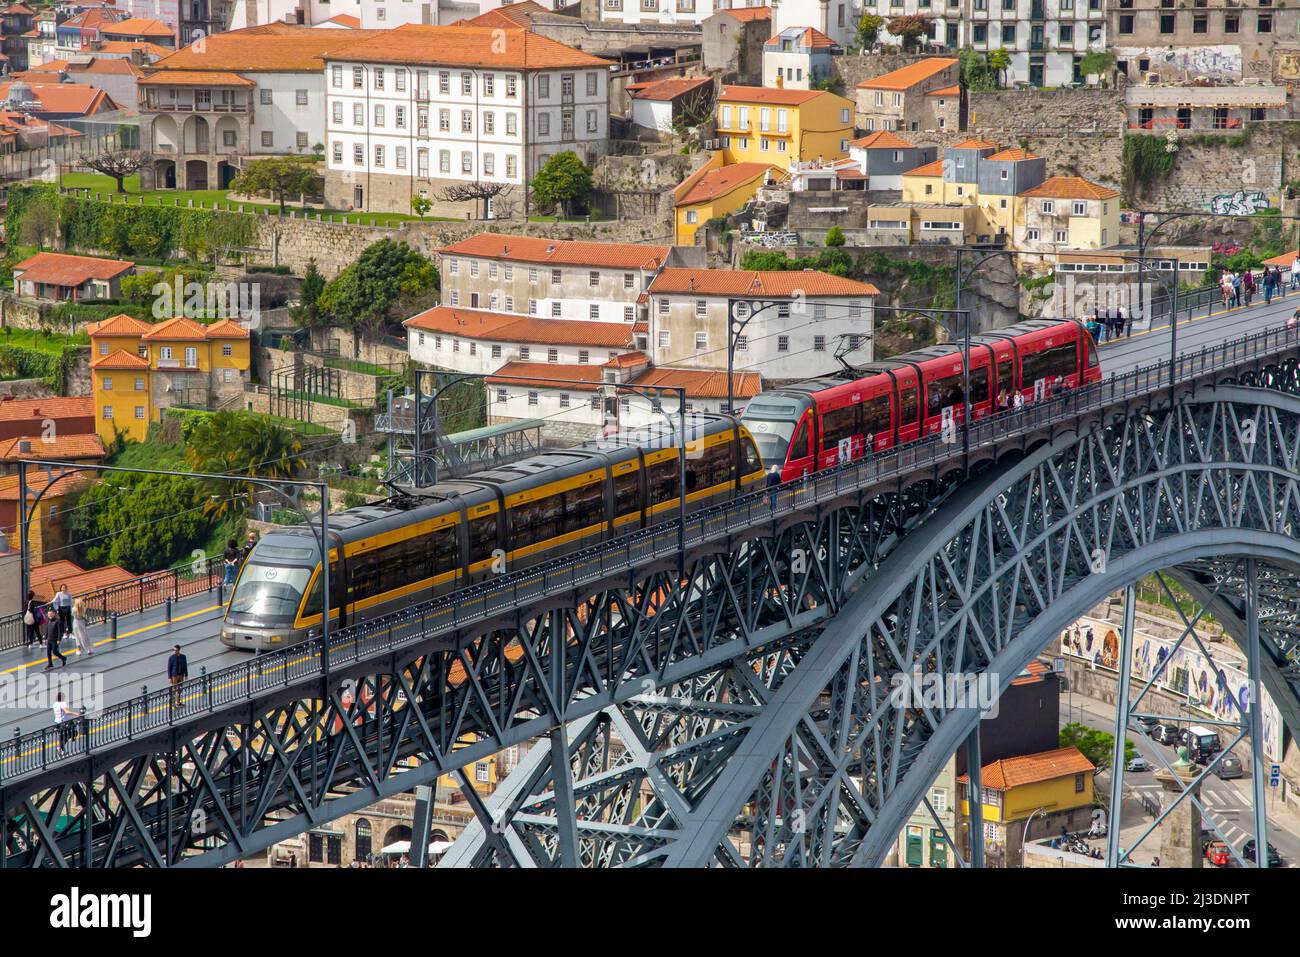 Metro do Porto tram crossing Pont Luiz 1 bridge over the River Douro Porto Portugal which was designed by Theophile Seyrig a partner of Gustave Eiffel Stock Photo